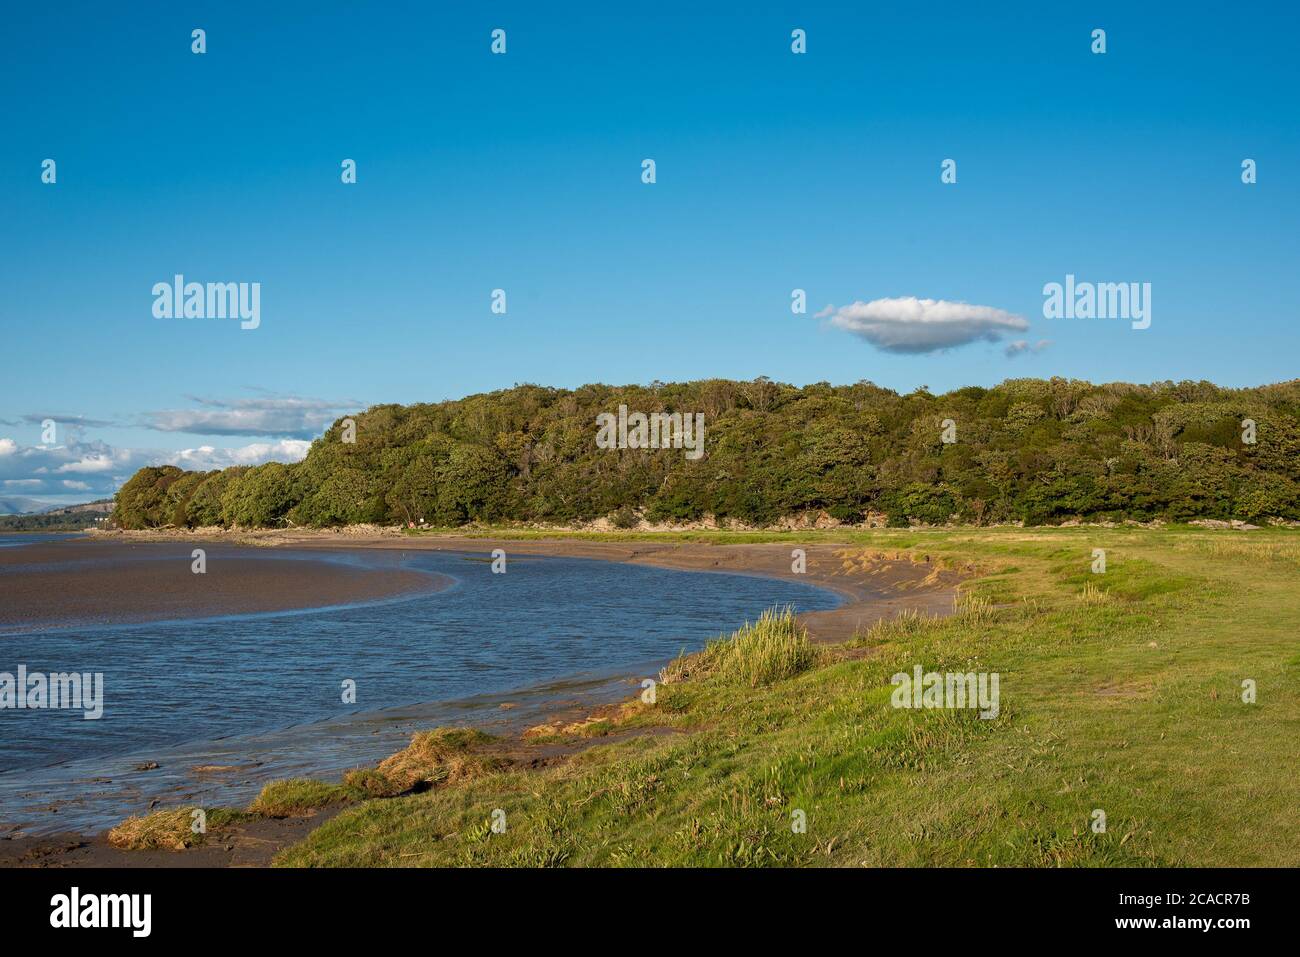 View of the Kent Estuary from New Barns, Arnside, Cumbria, UK. Stock Photo